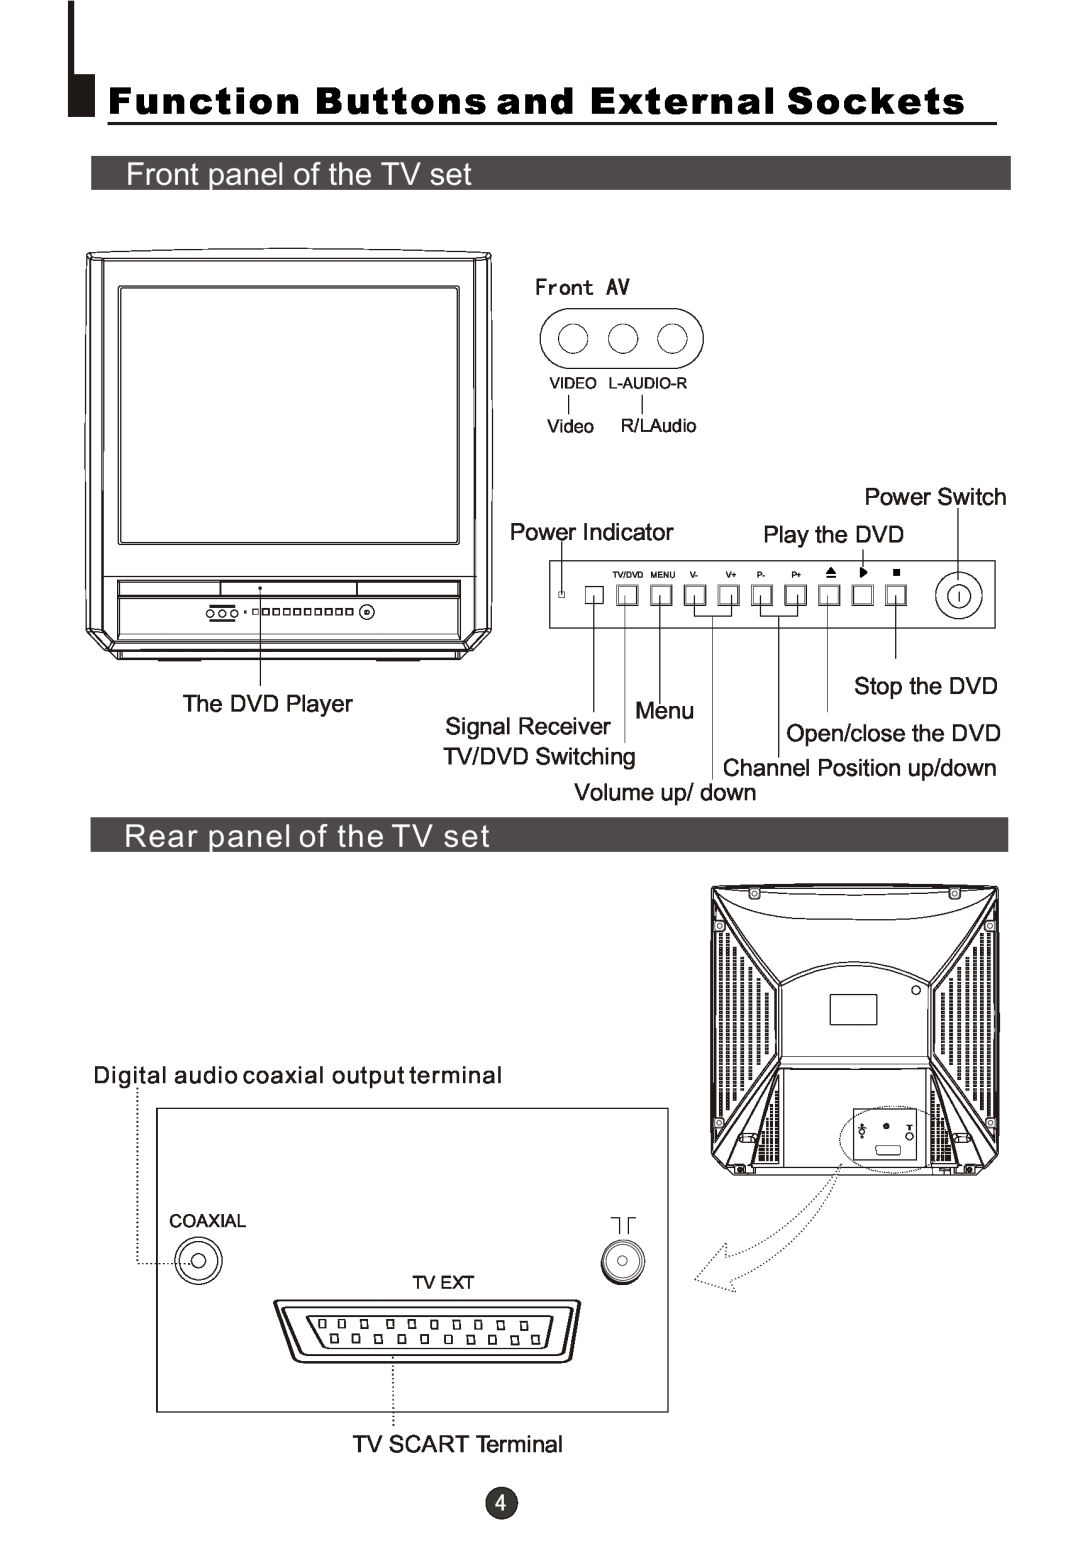 Haier DTA21F98 owner manual Function Buttons and External Sockets, Front panel of the TV set, Rear panel of the TV set 